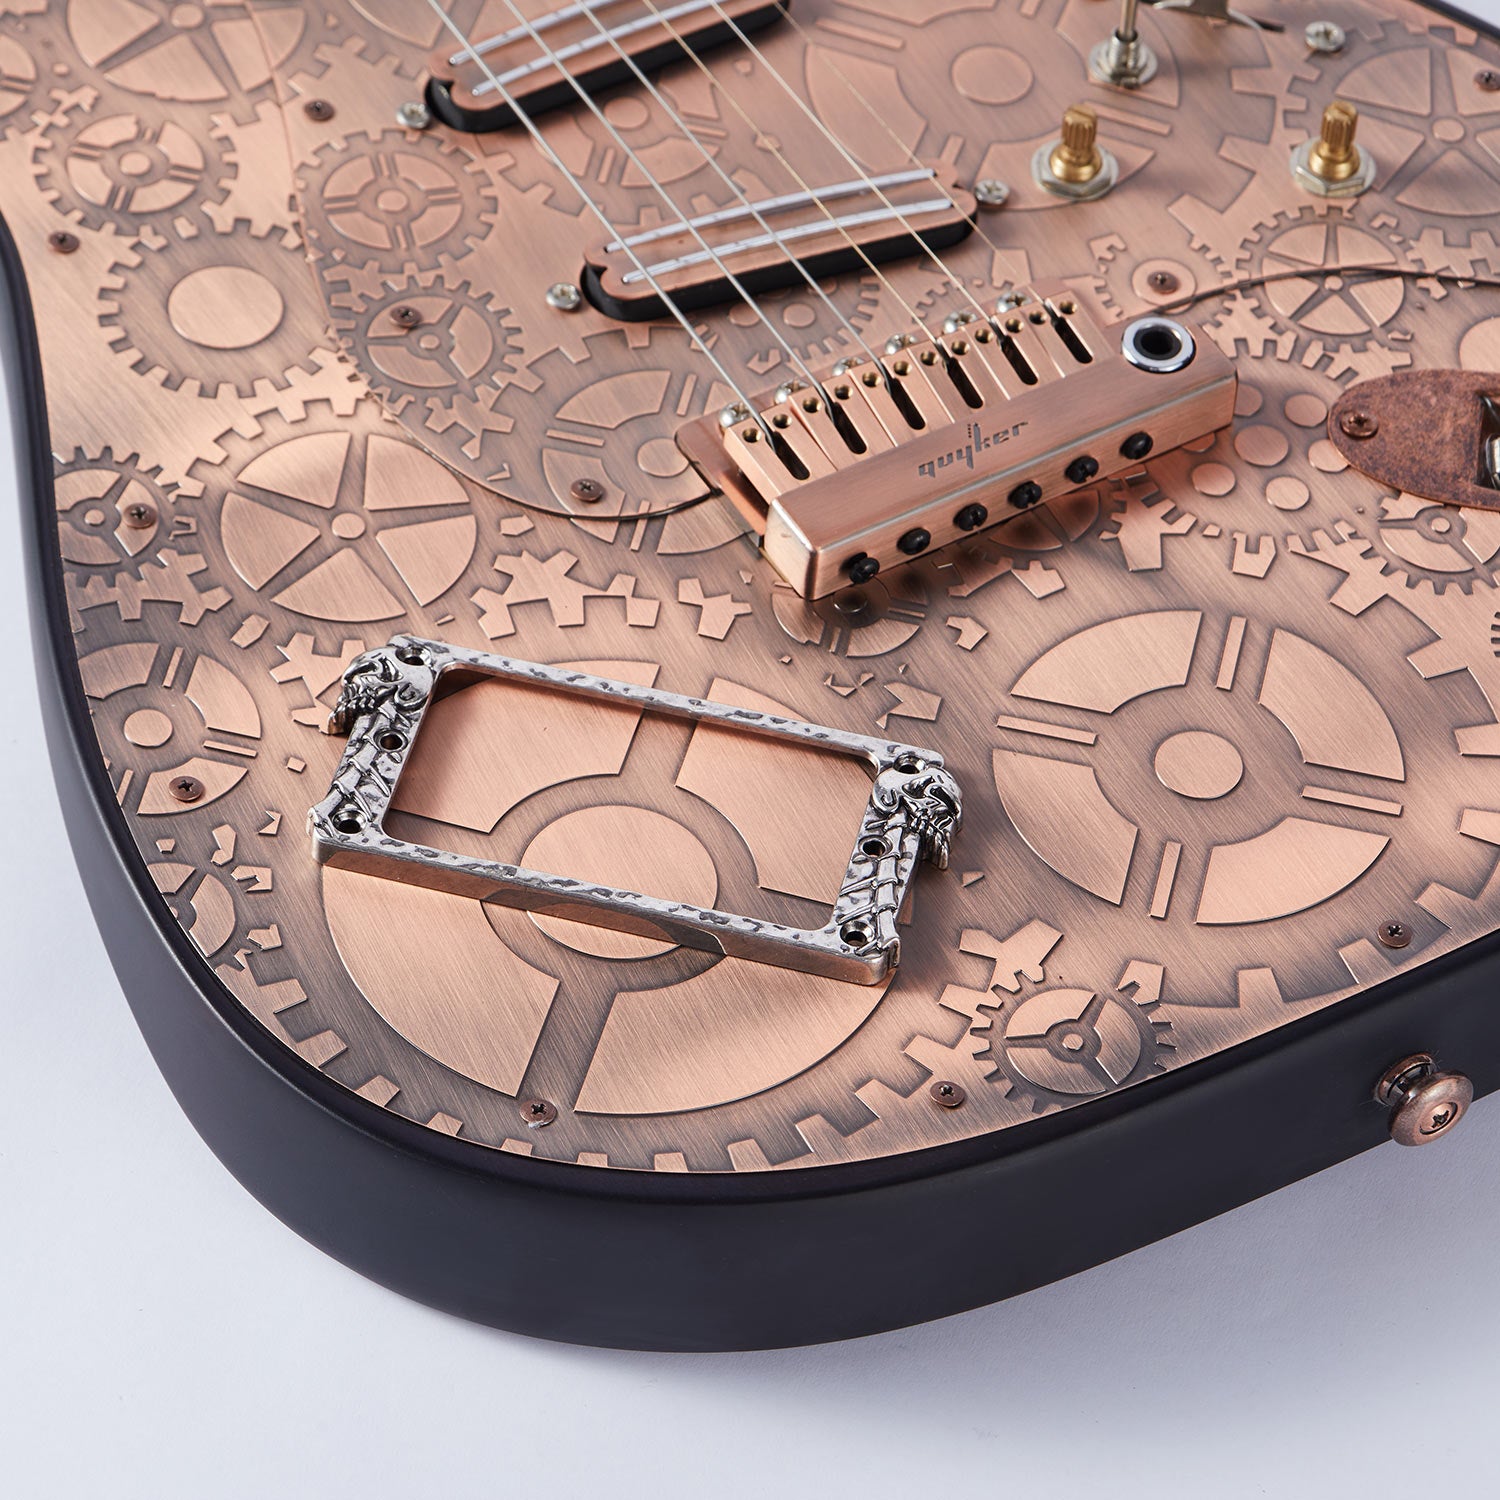 A versatile and durable pickup frame designed for electric guitars.